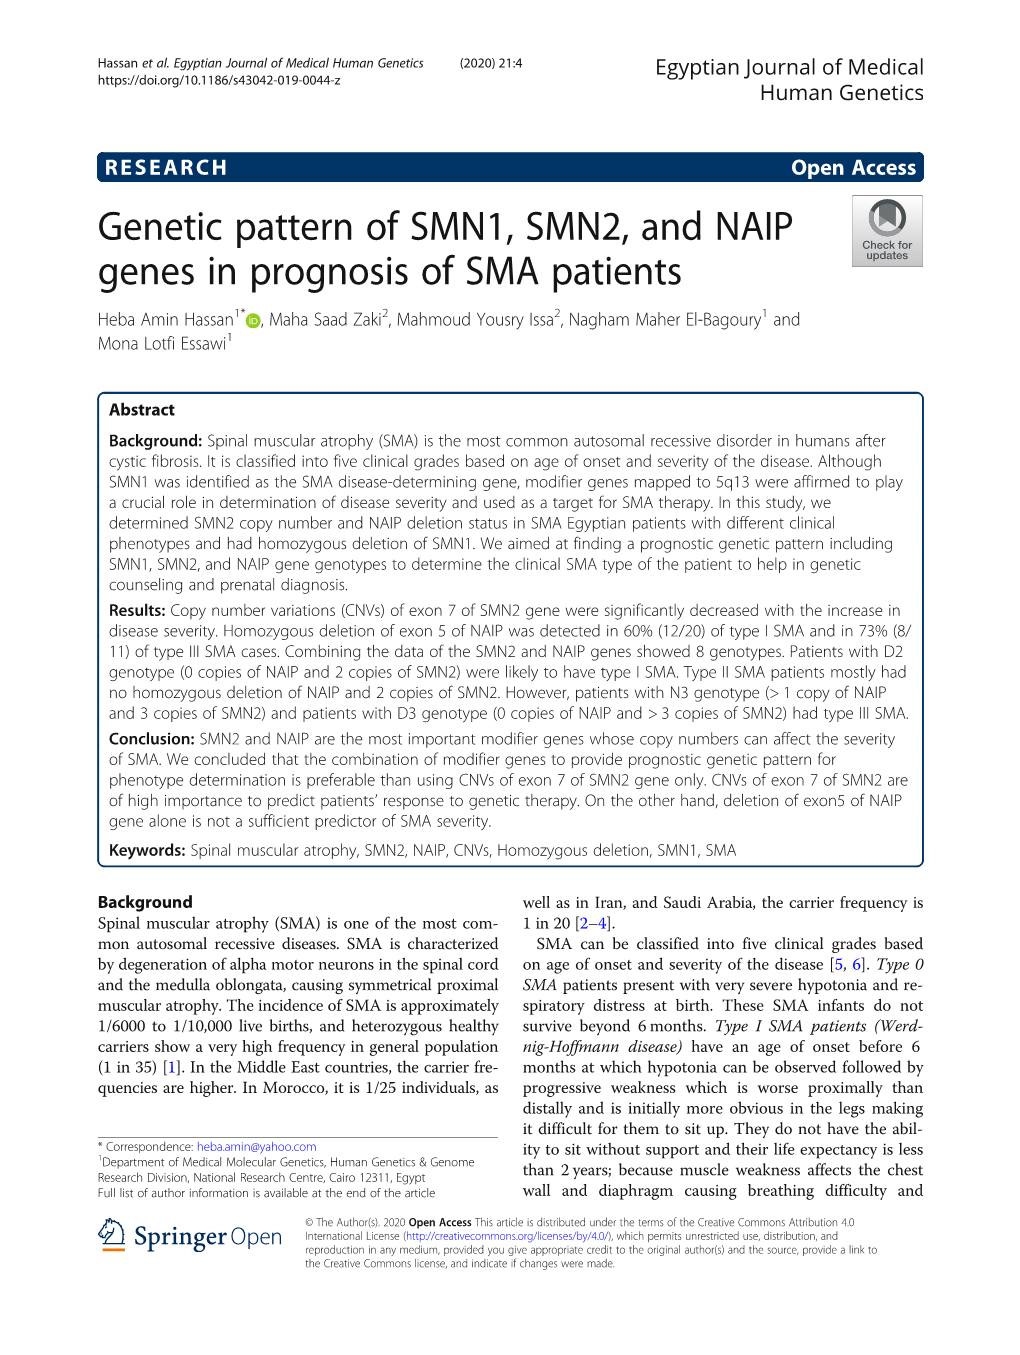 Genetic Pattern of SMN1, SMN2, and NAIP Genes in Prognosis of SMA